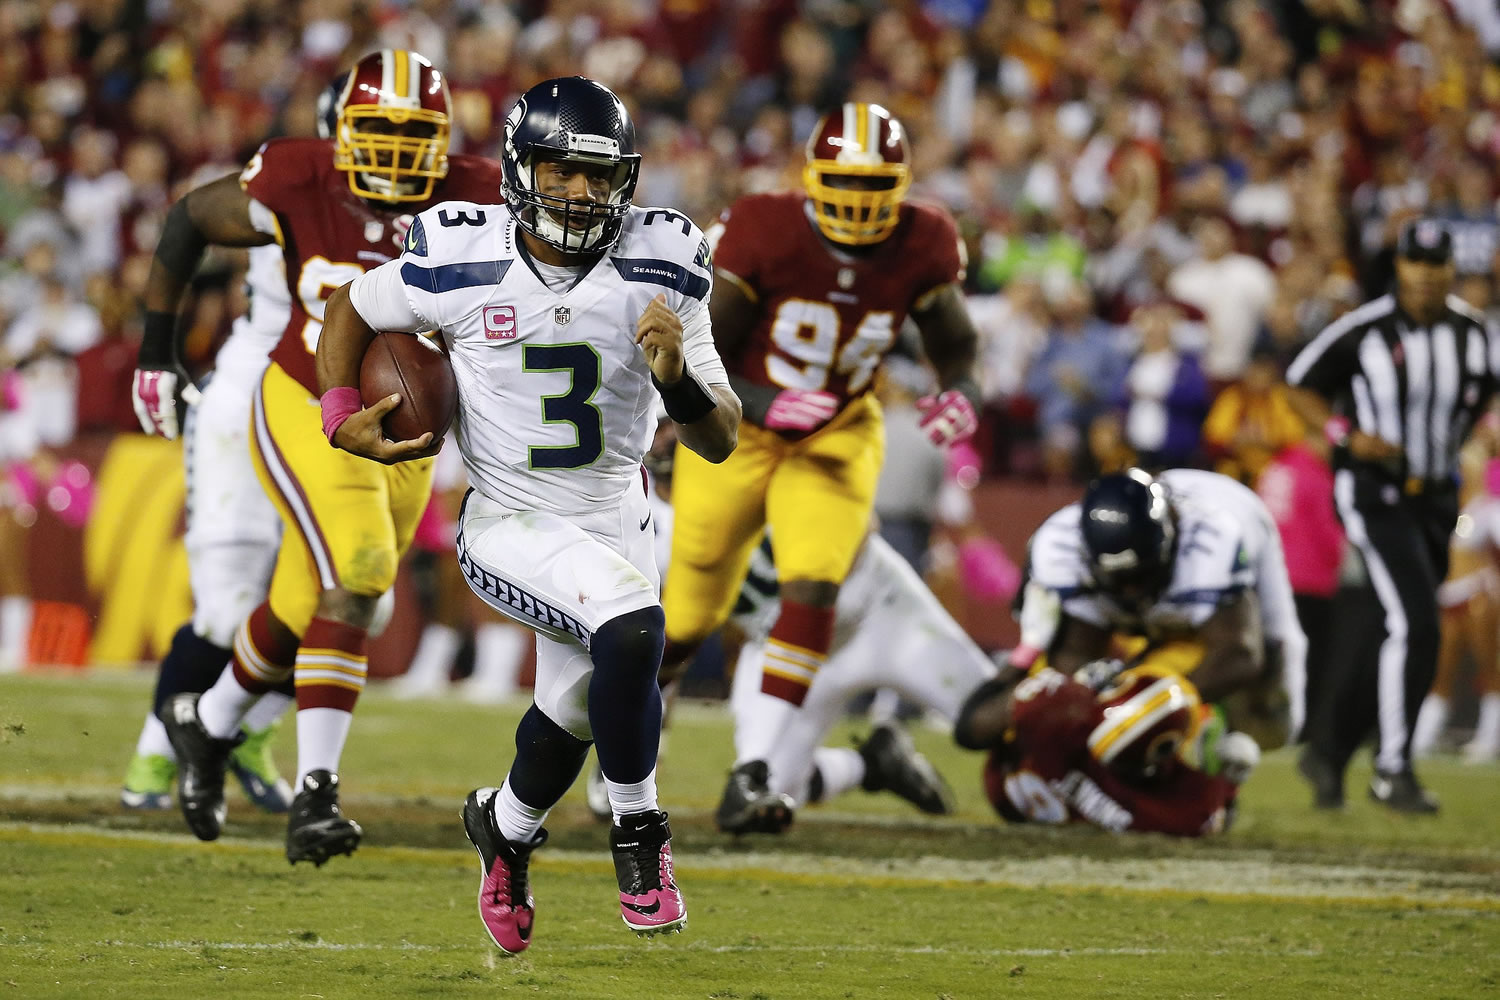 Seattle Seahawks quarterback Russell Wilson (3) scrambles with the ball during the second half of an NFL football game against the Washington Redskins in Landover, Md.